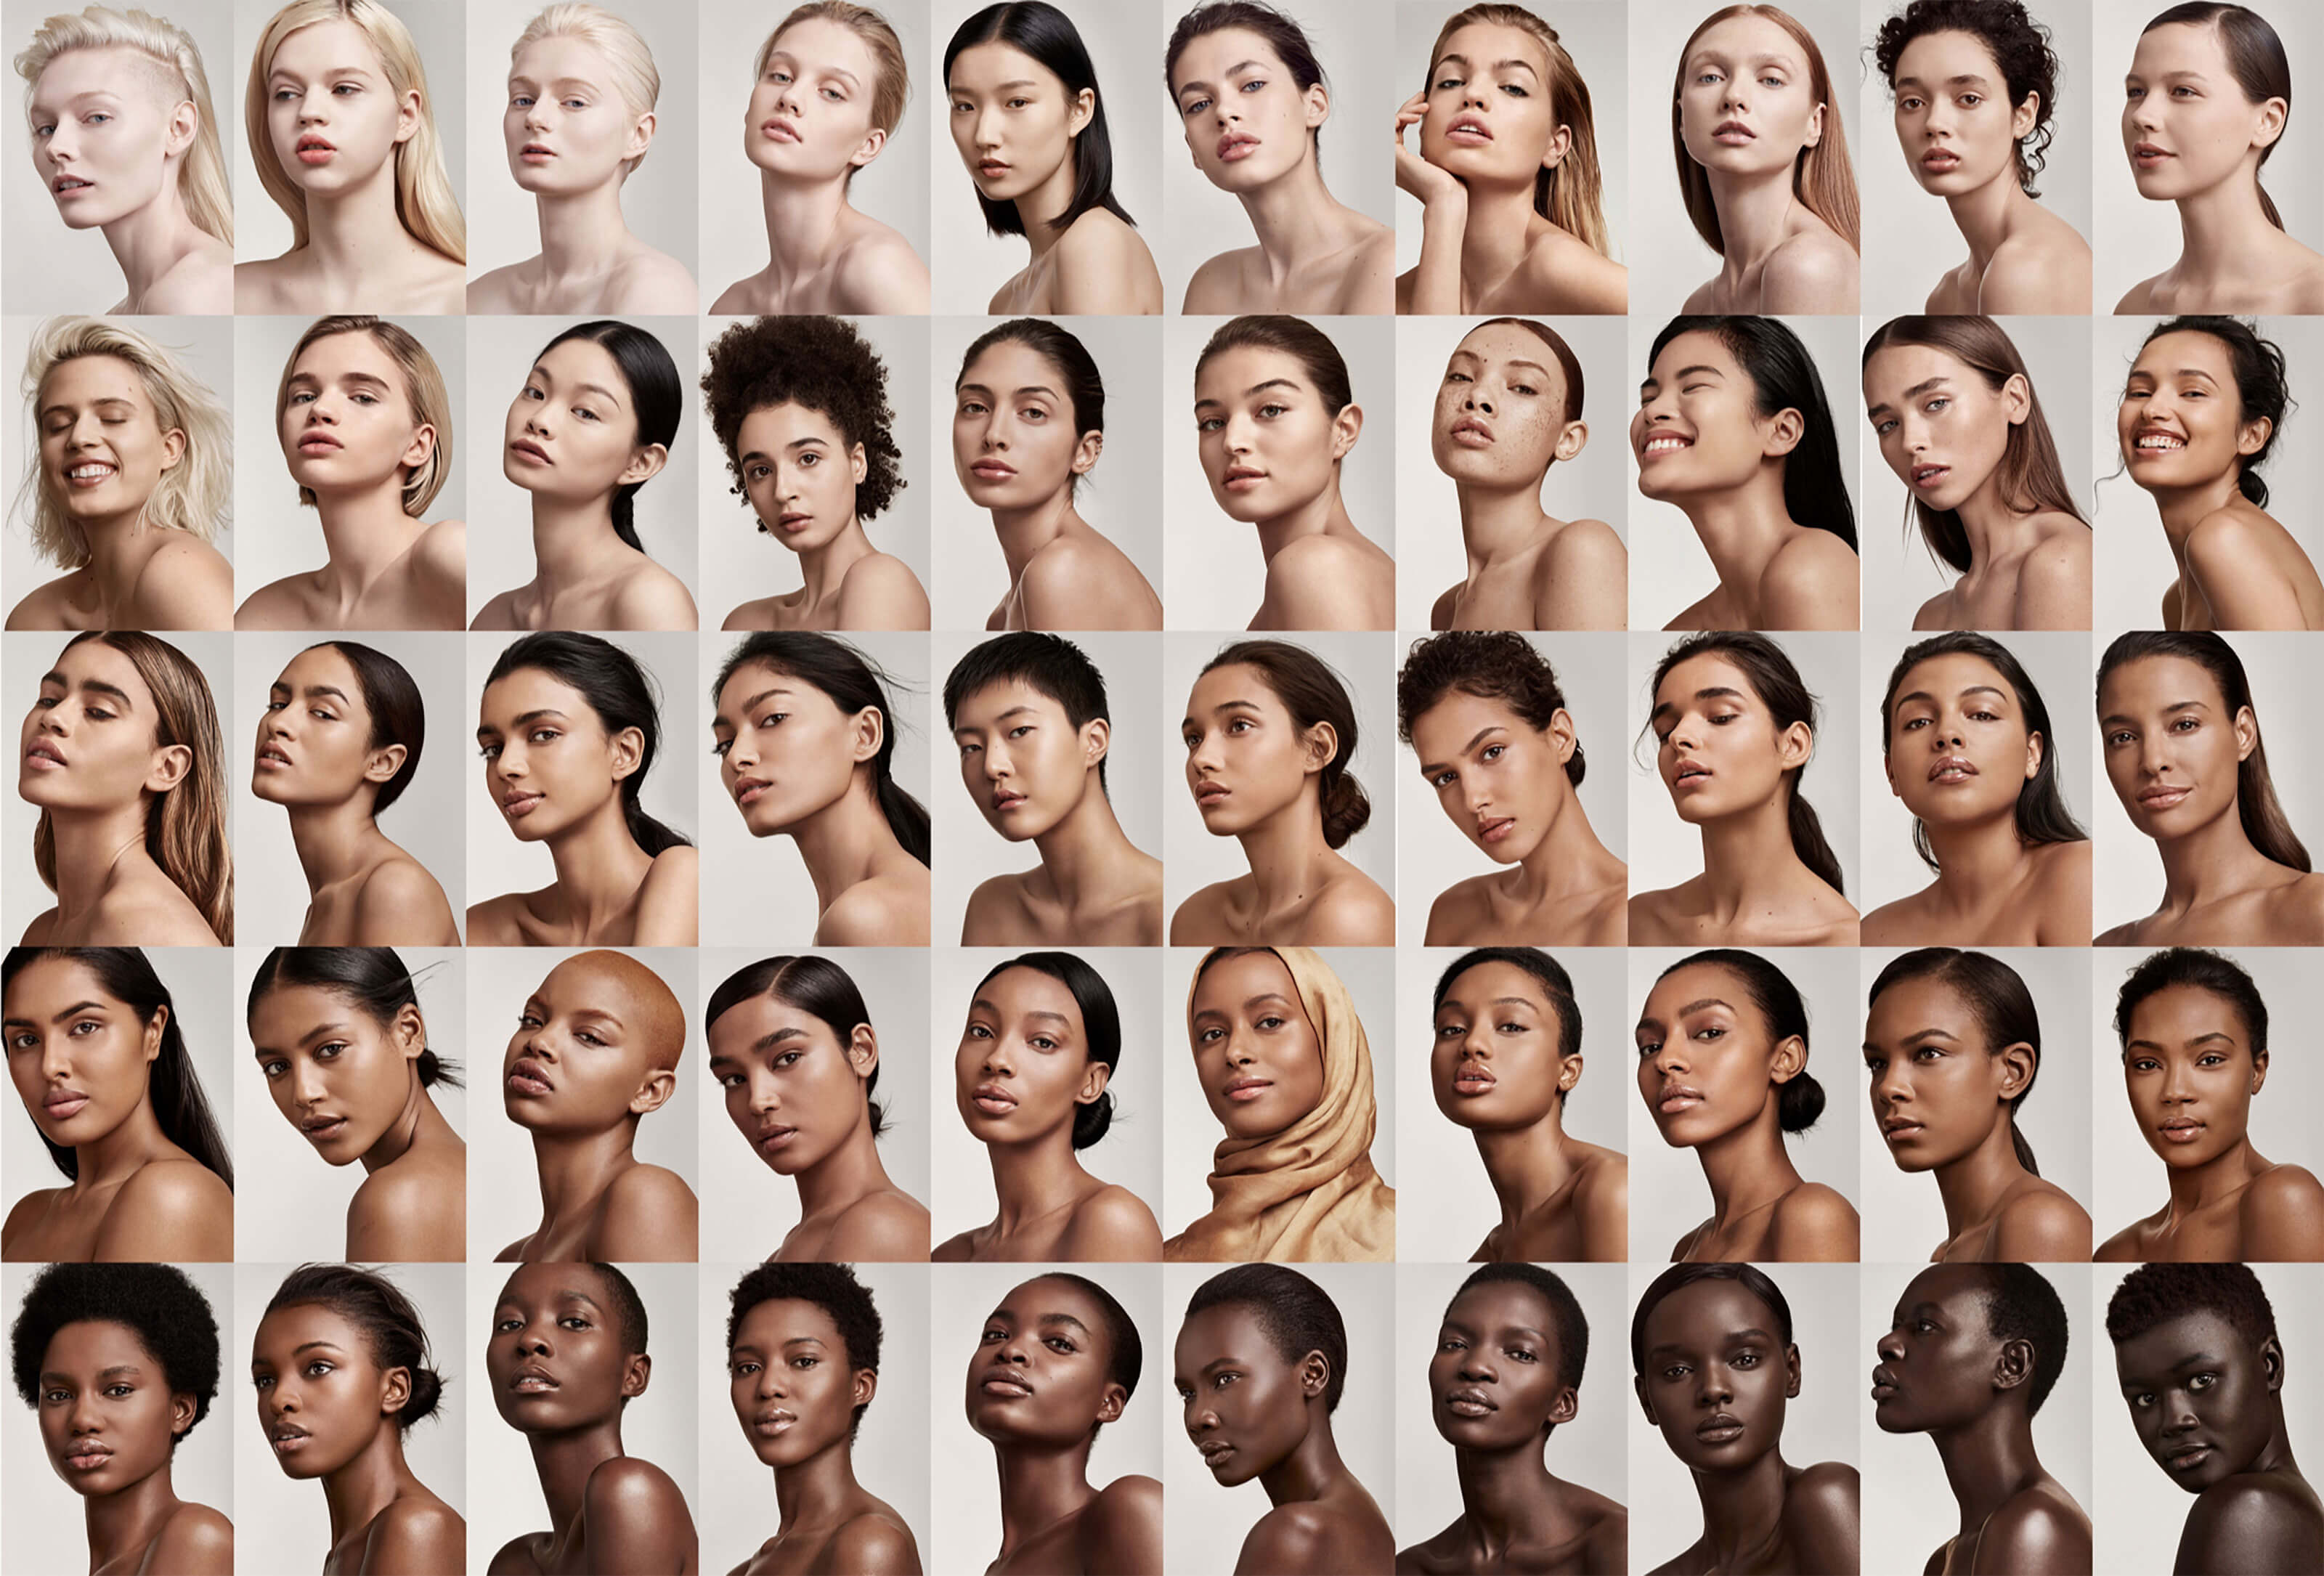 Inclusive marketing campaign example by Fenty Beauty